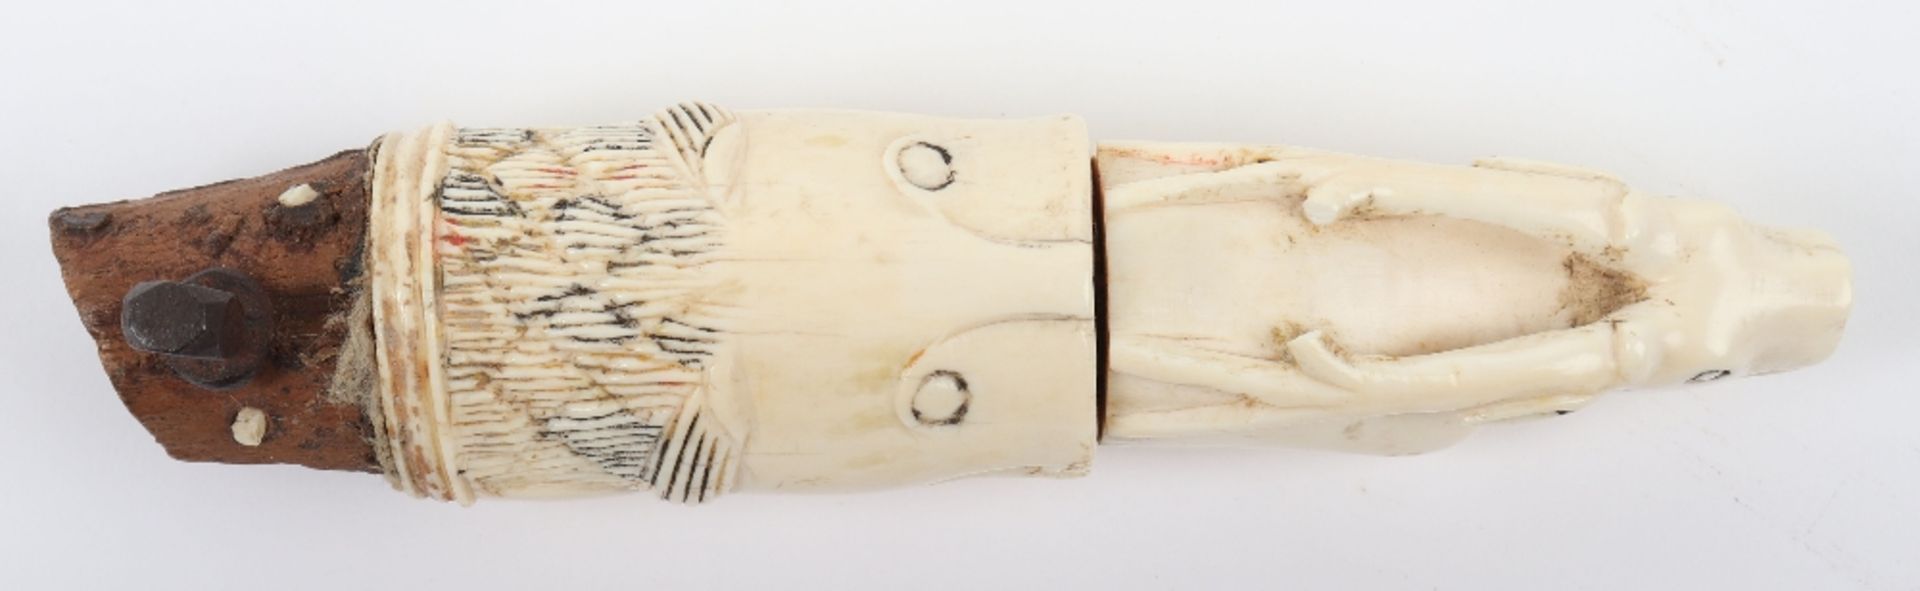 ^ Two Sections from an Indian Ivory Powder Flask - Image 6 of 9